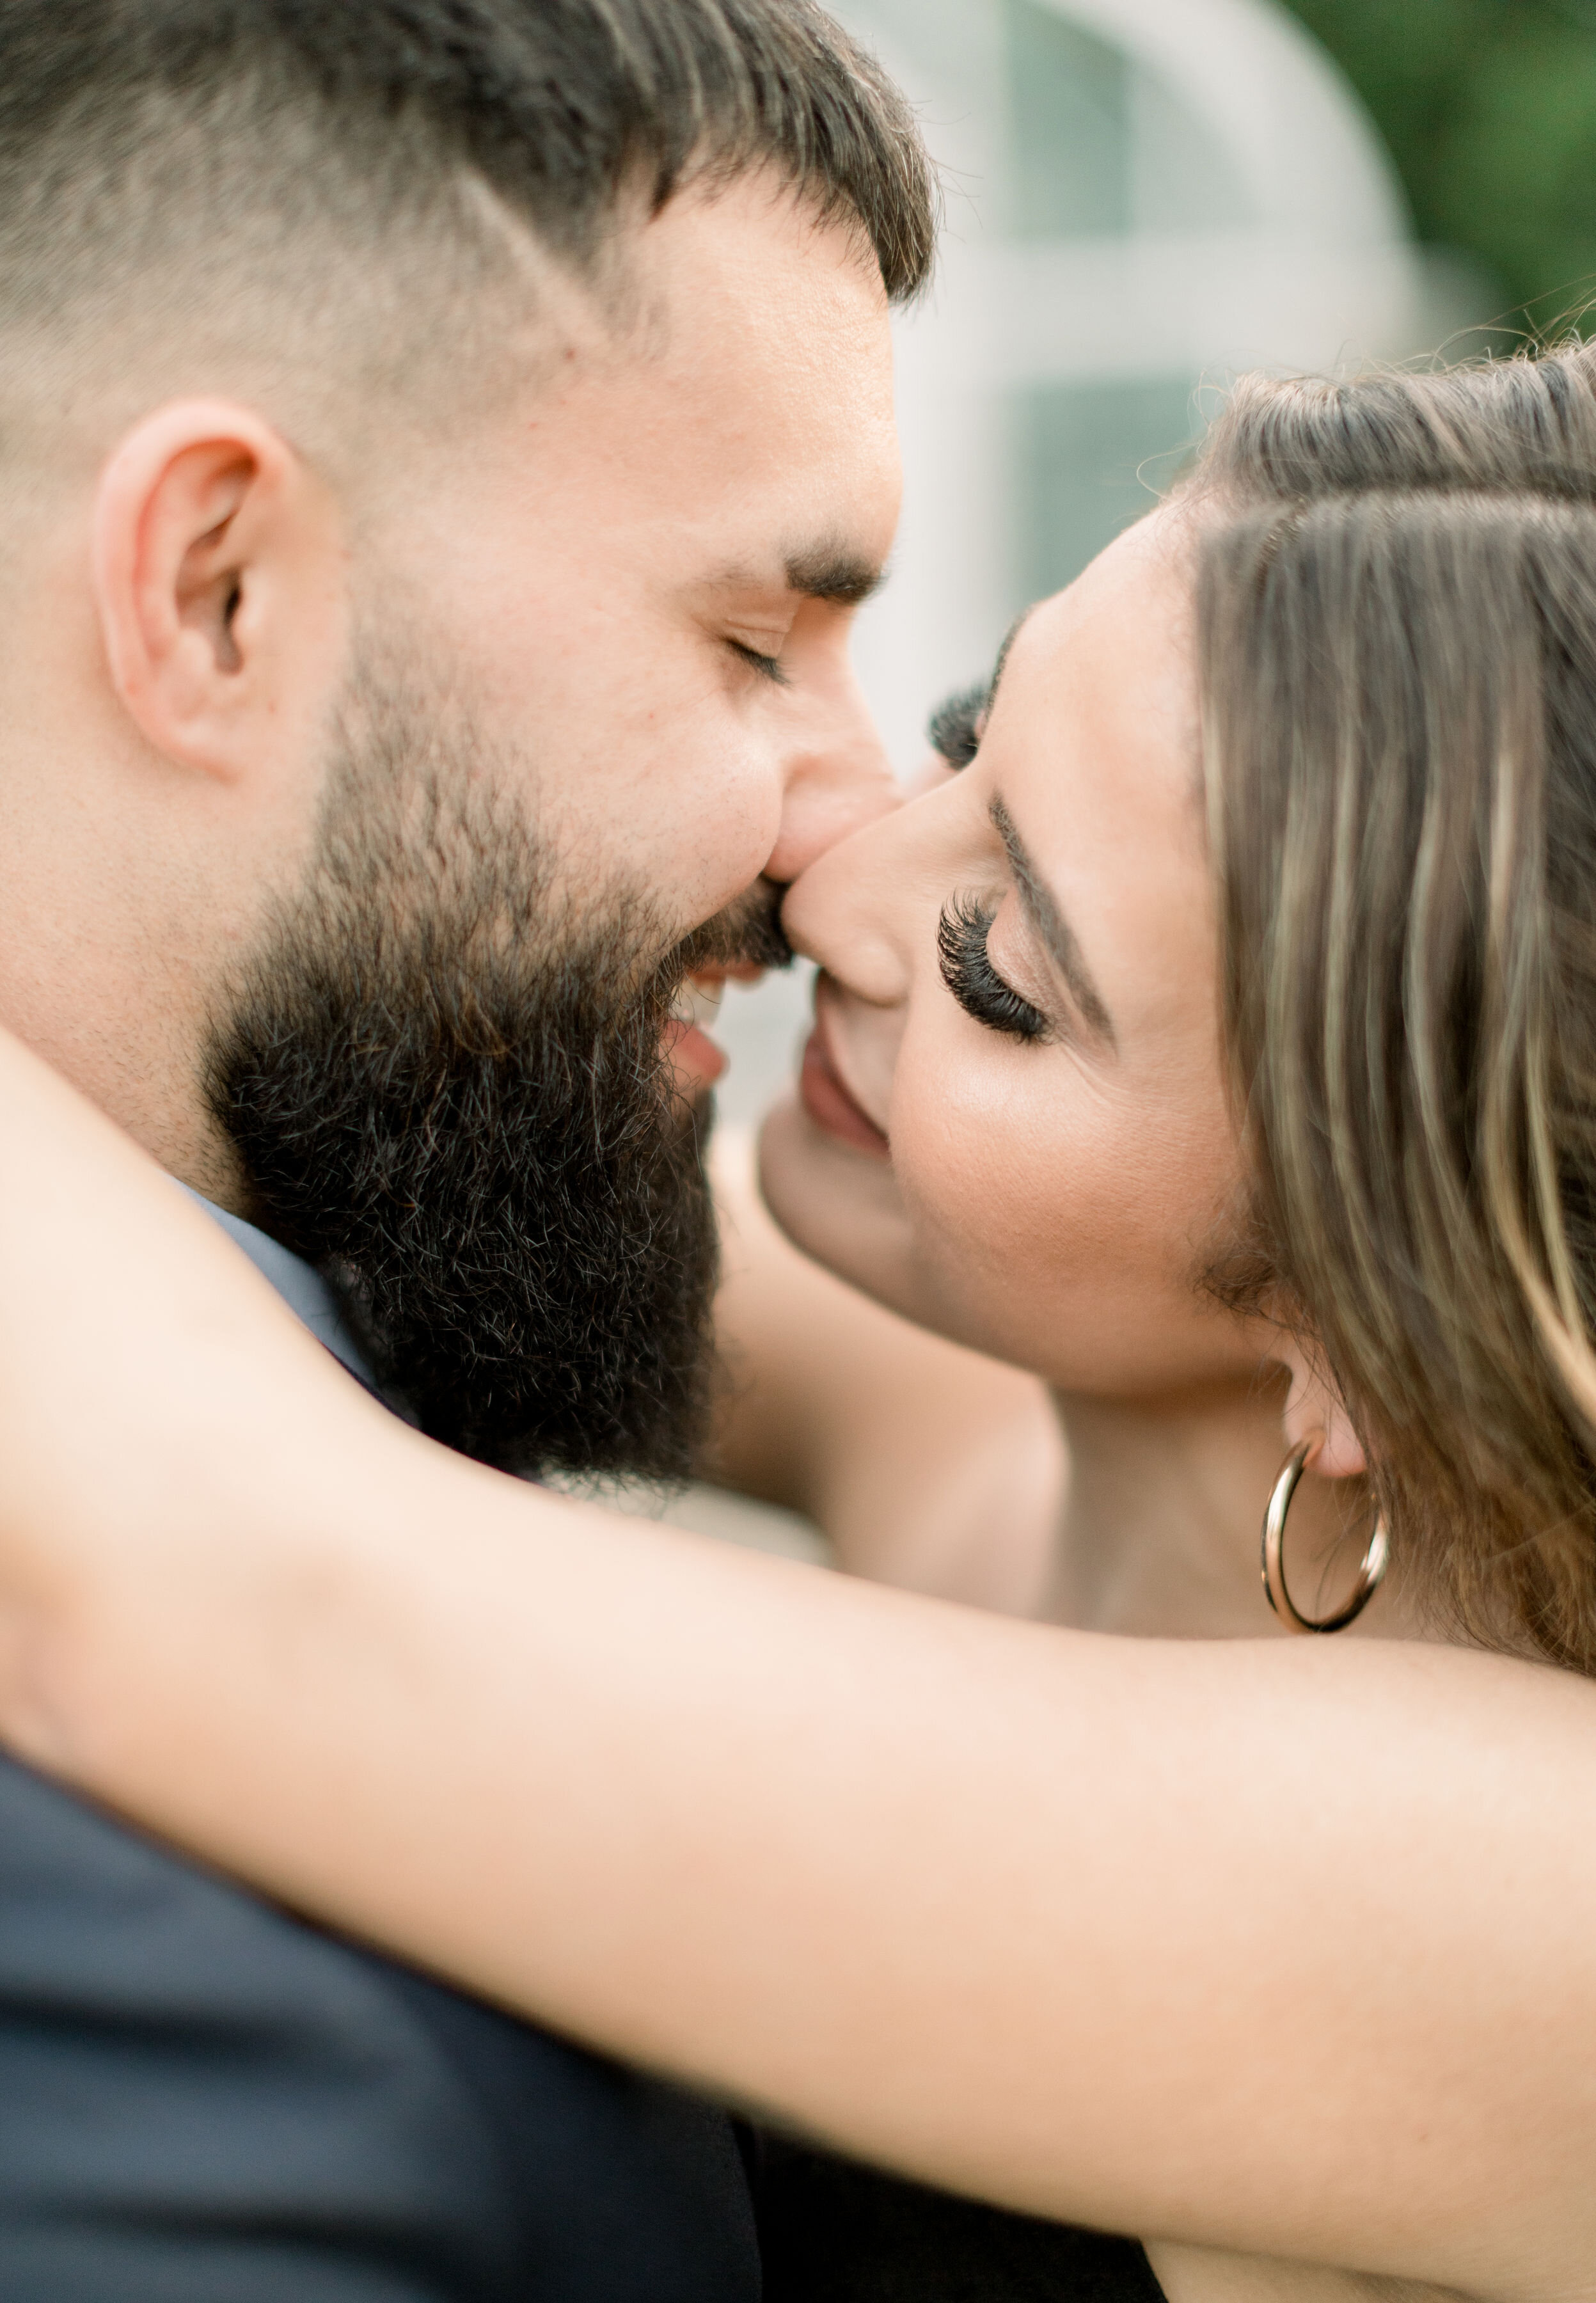  Ottawa, Ontario photographer, Chelsea Mason Photography captures an up close photo of this engaged couple leaning in for a kiss from an arial view. arial view of couple kissing up close kissing photo women's false lashes formal engagement photos #Ch